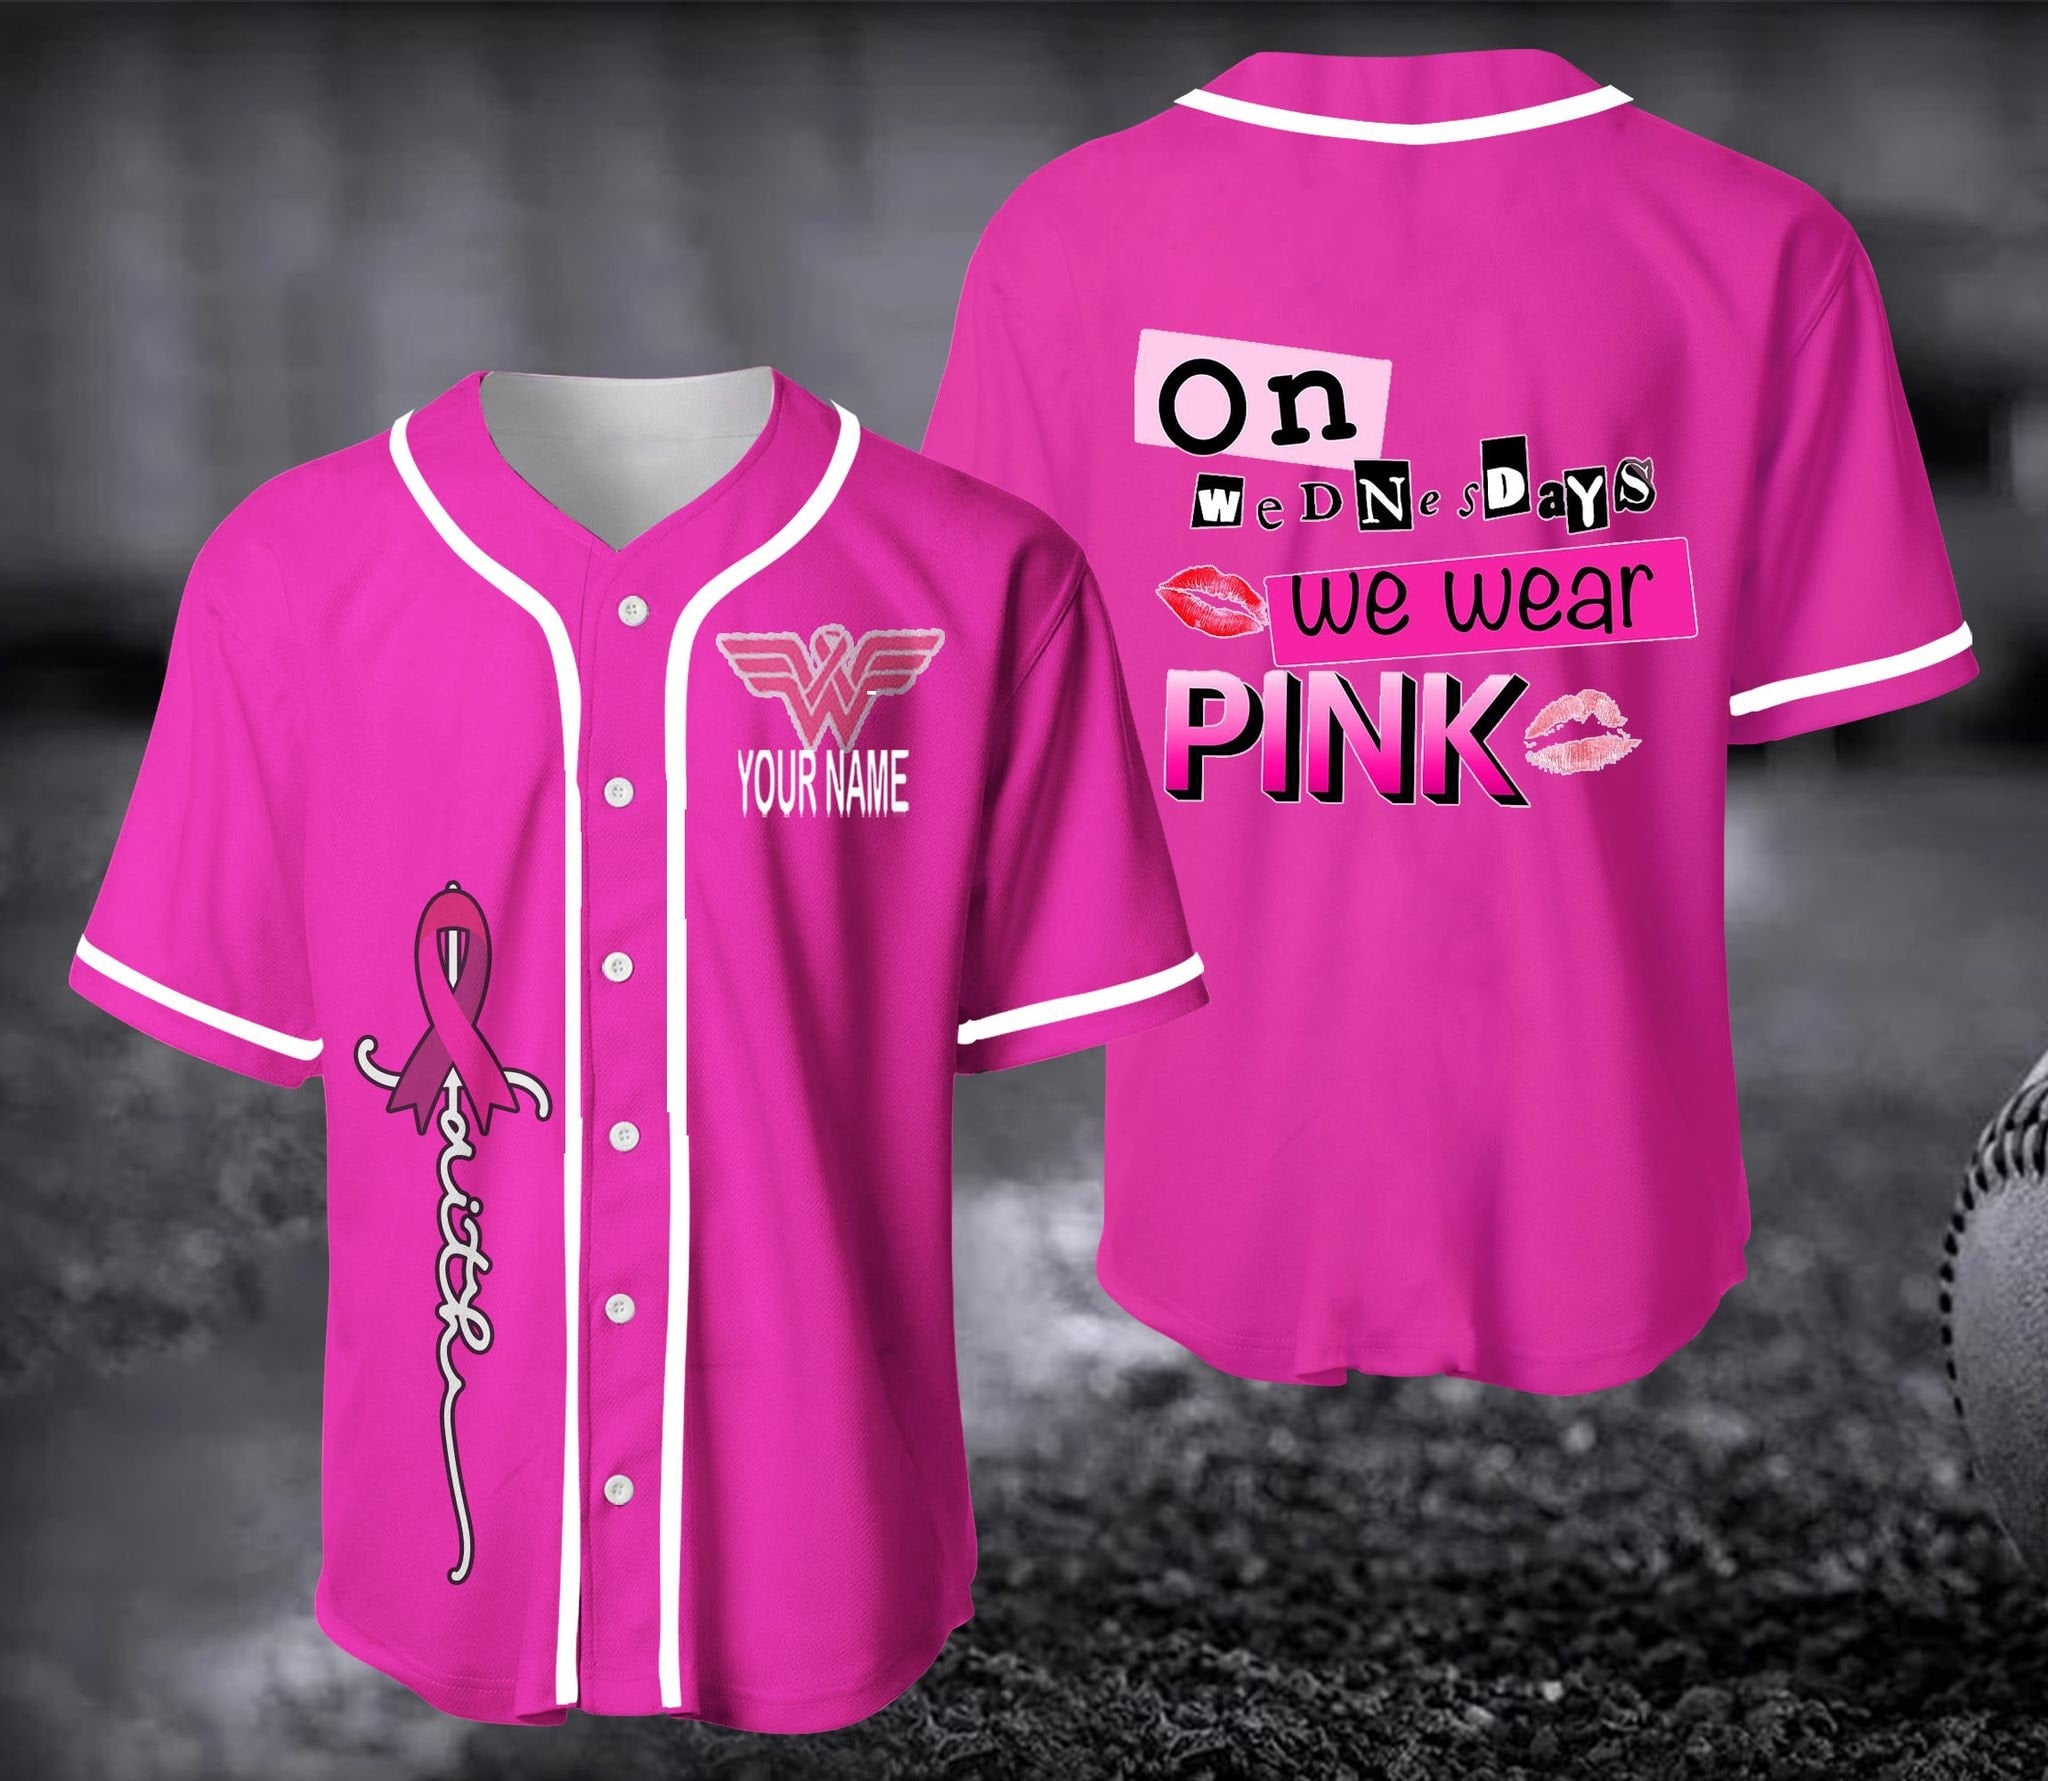 On Wednesday We Wear Pink Jersey Shirt/ Multilcolor Breast Cancer Jersey Shirt